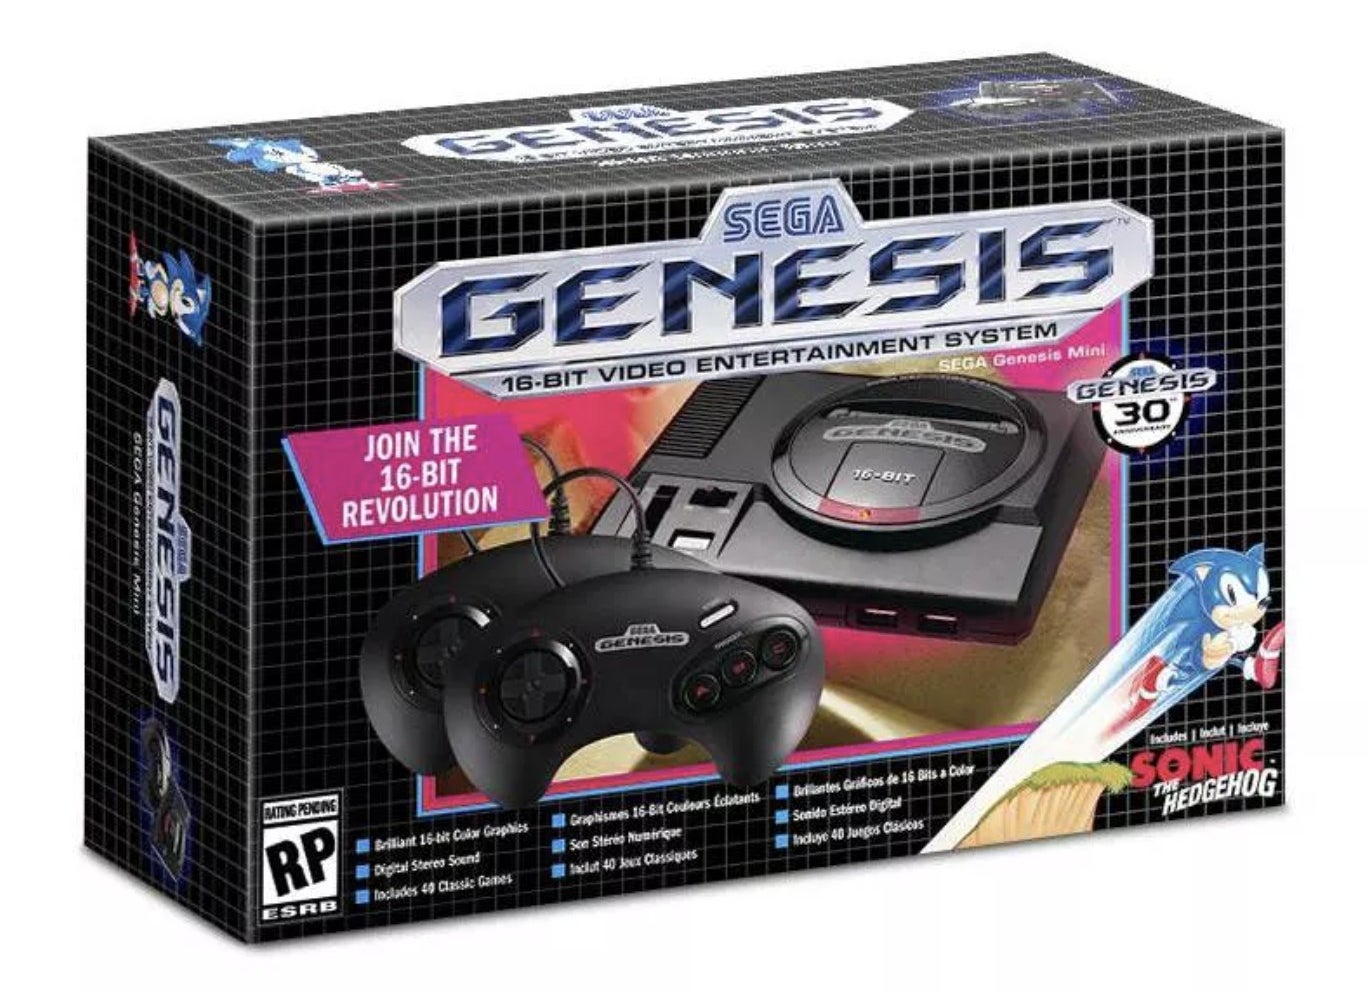 A black box with a Sega Genesis console and controllers on the front